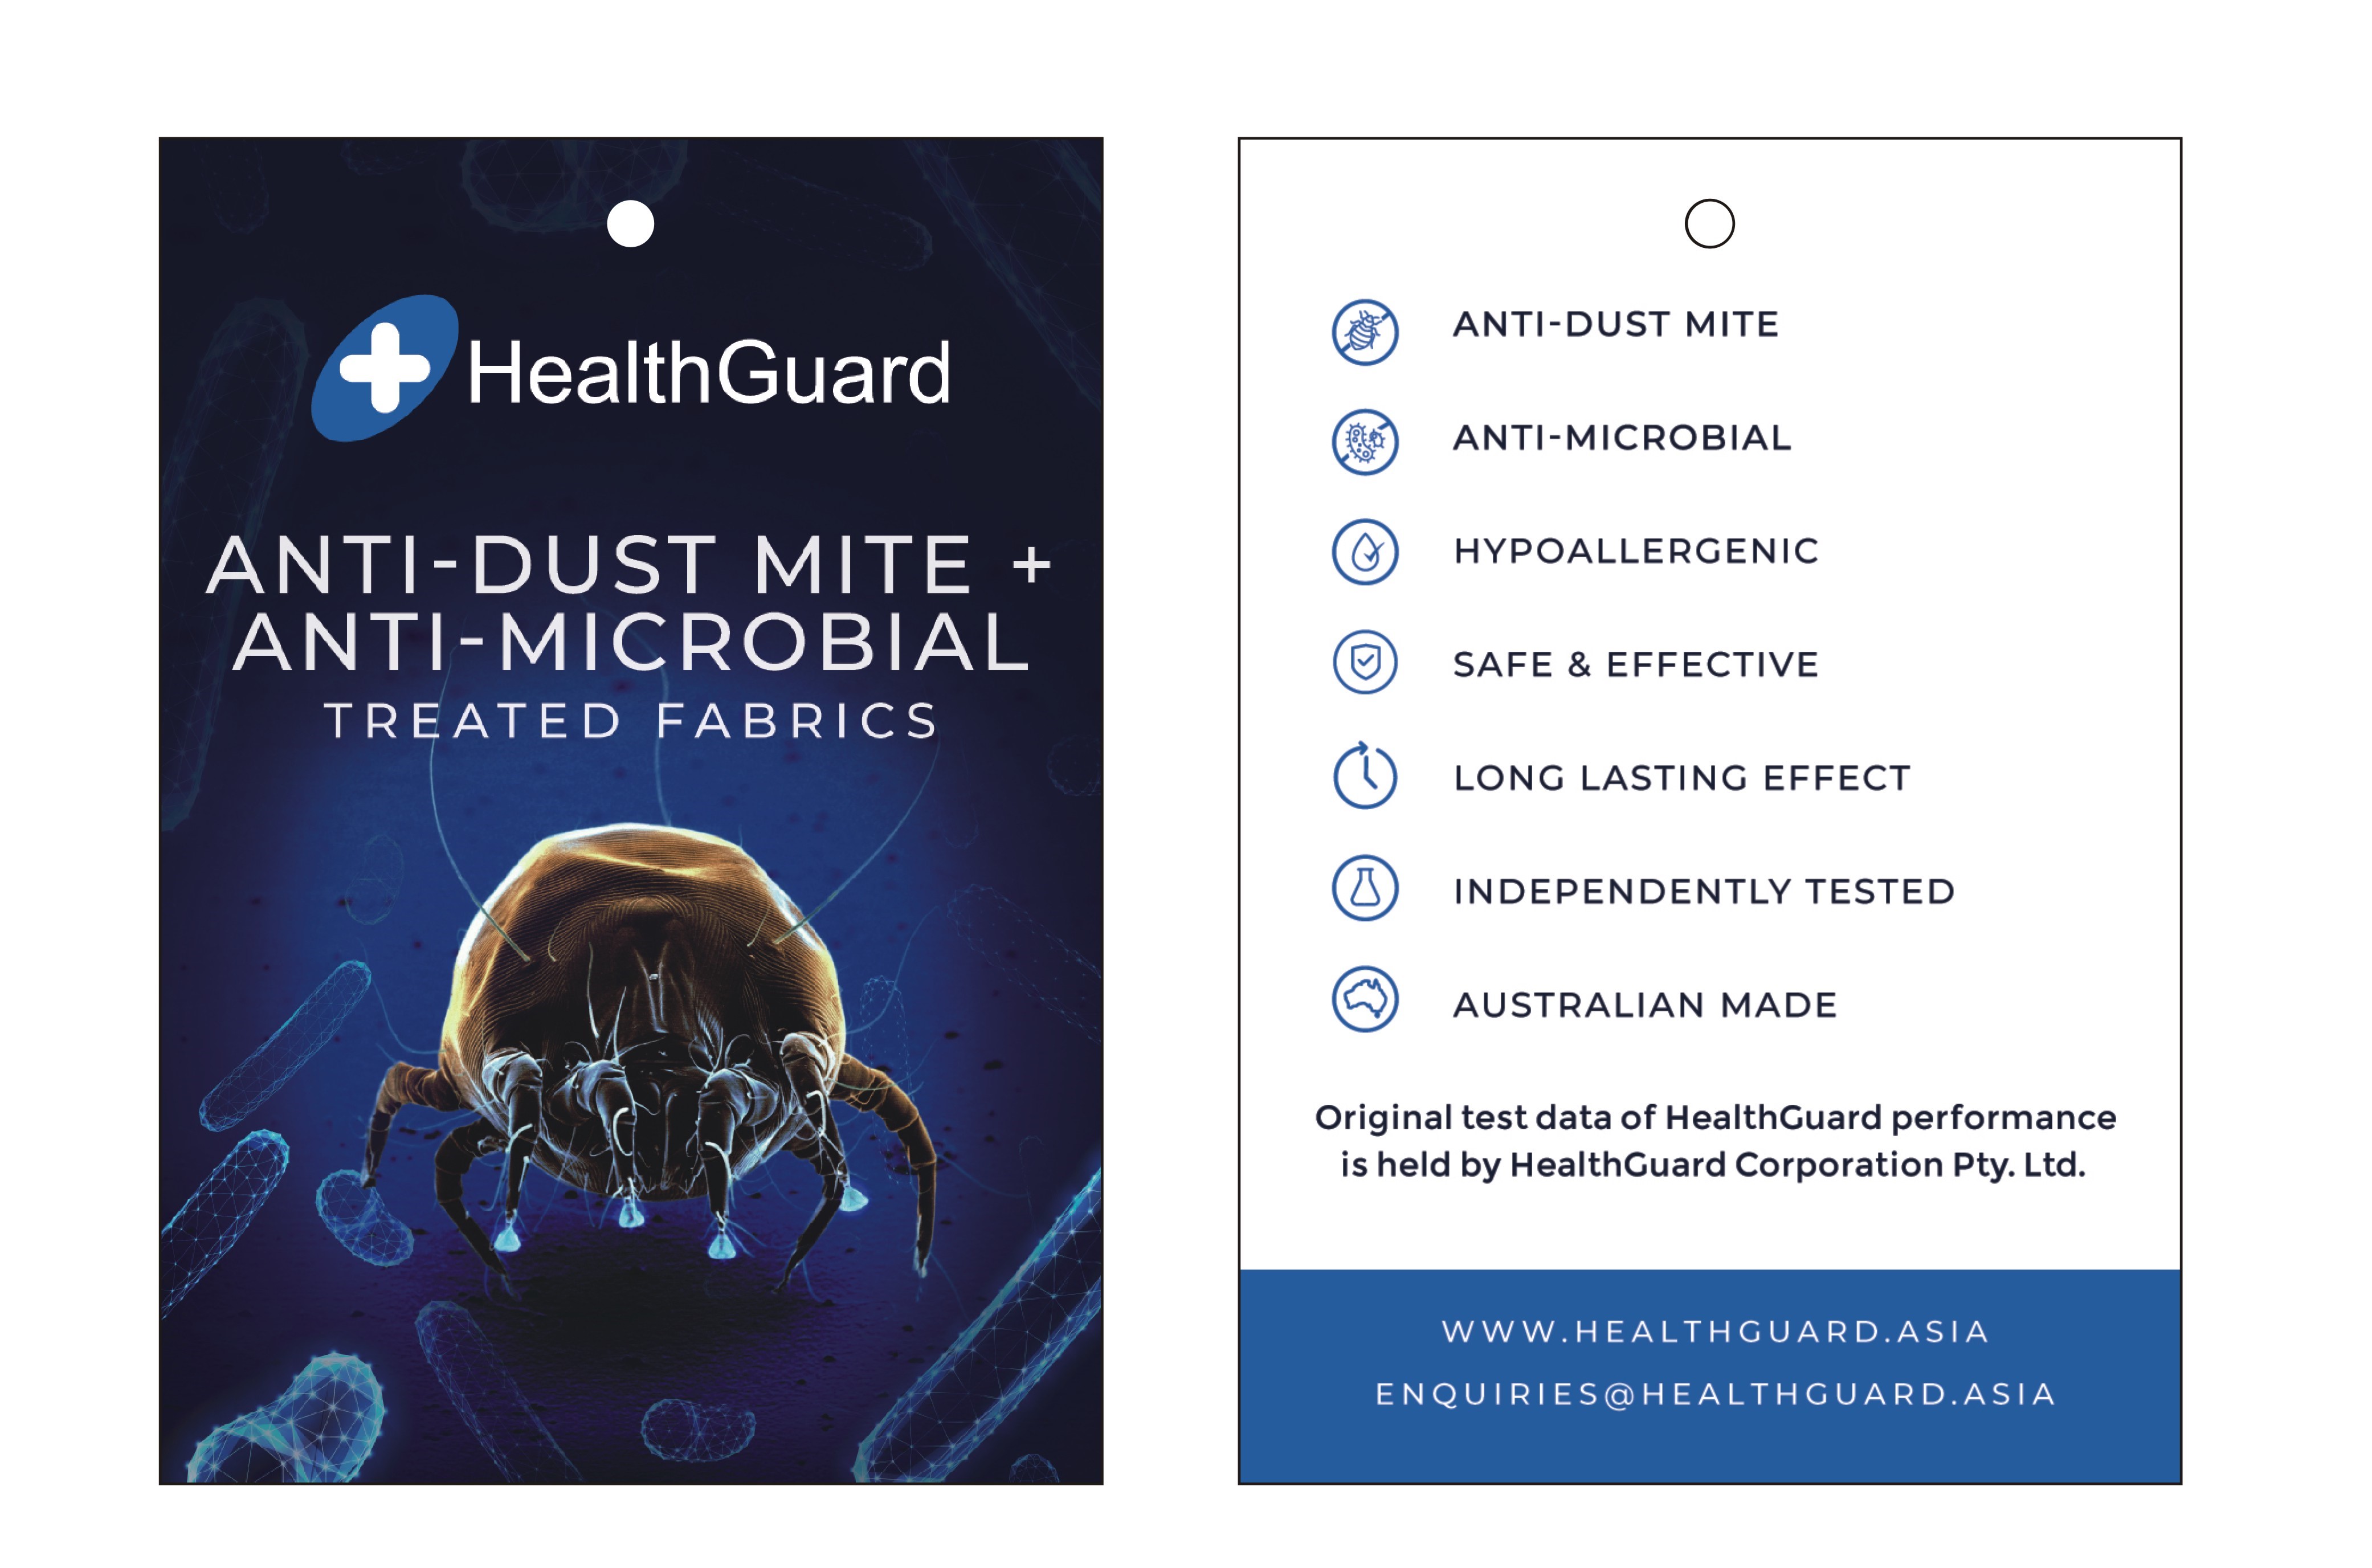 Anti-dustmite and Anti-microbial tag